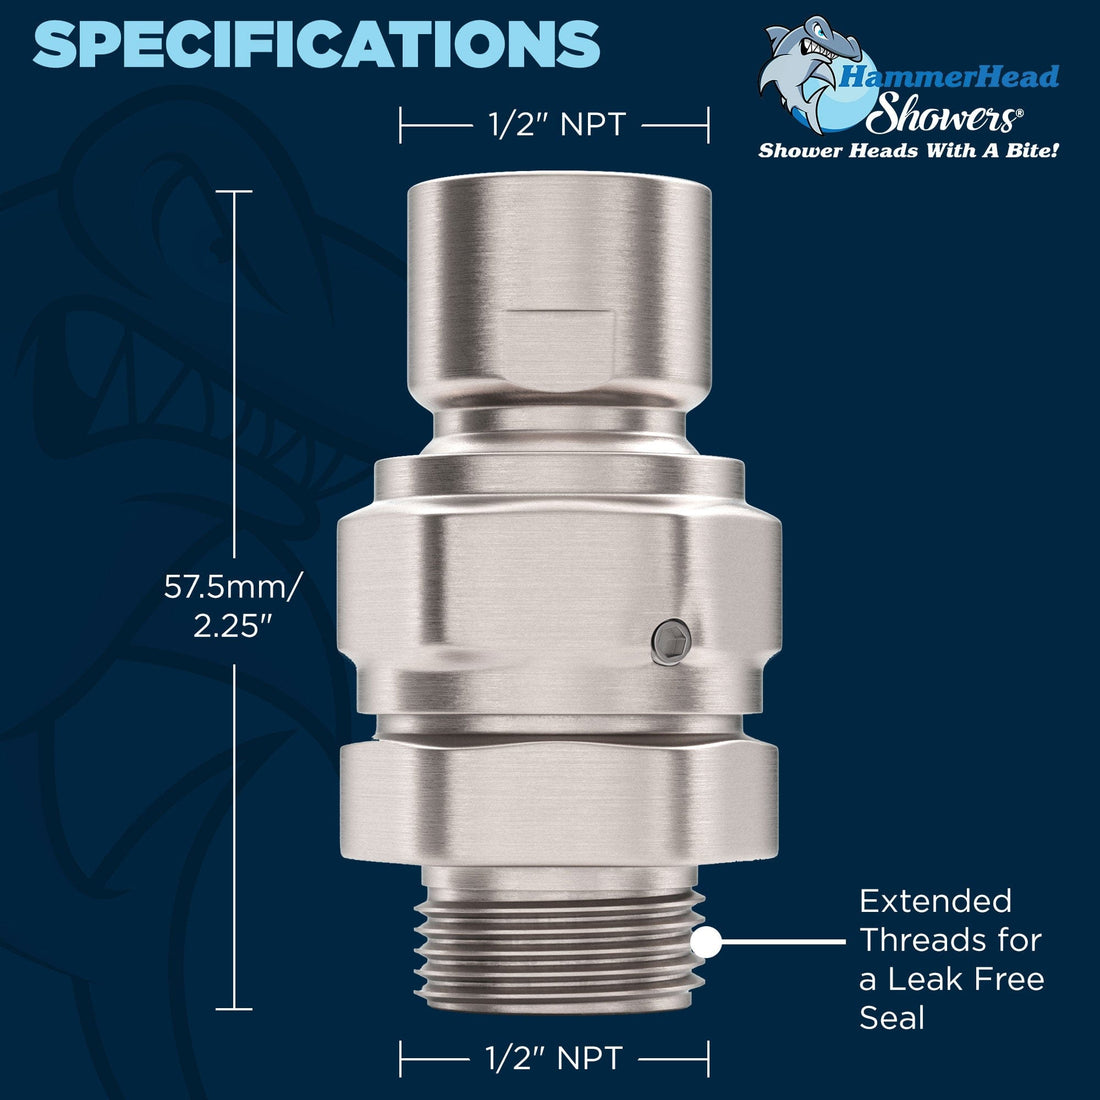 Specifications of Swivel Adapter with Extended Threads for a Leak Free Seal HammerHead Showers Brushed Nickel - The Shower Head Store